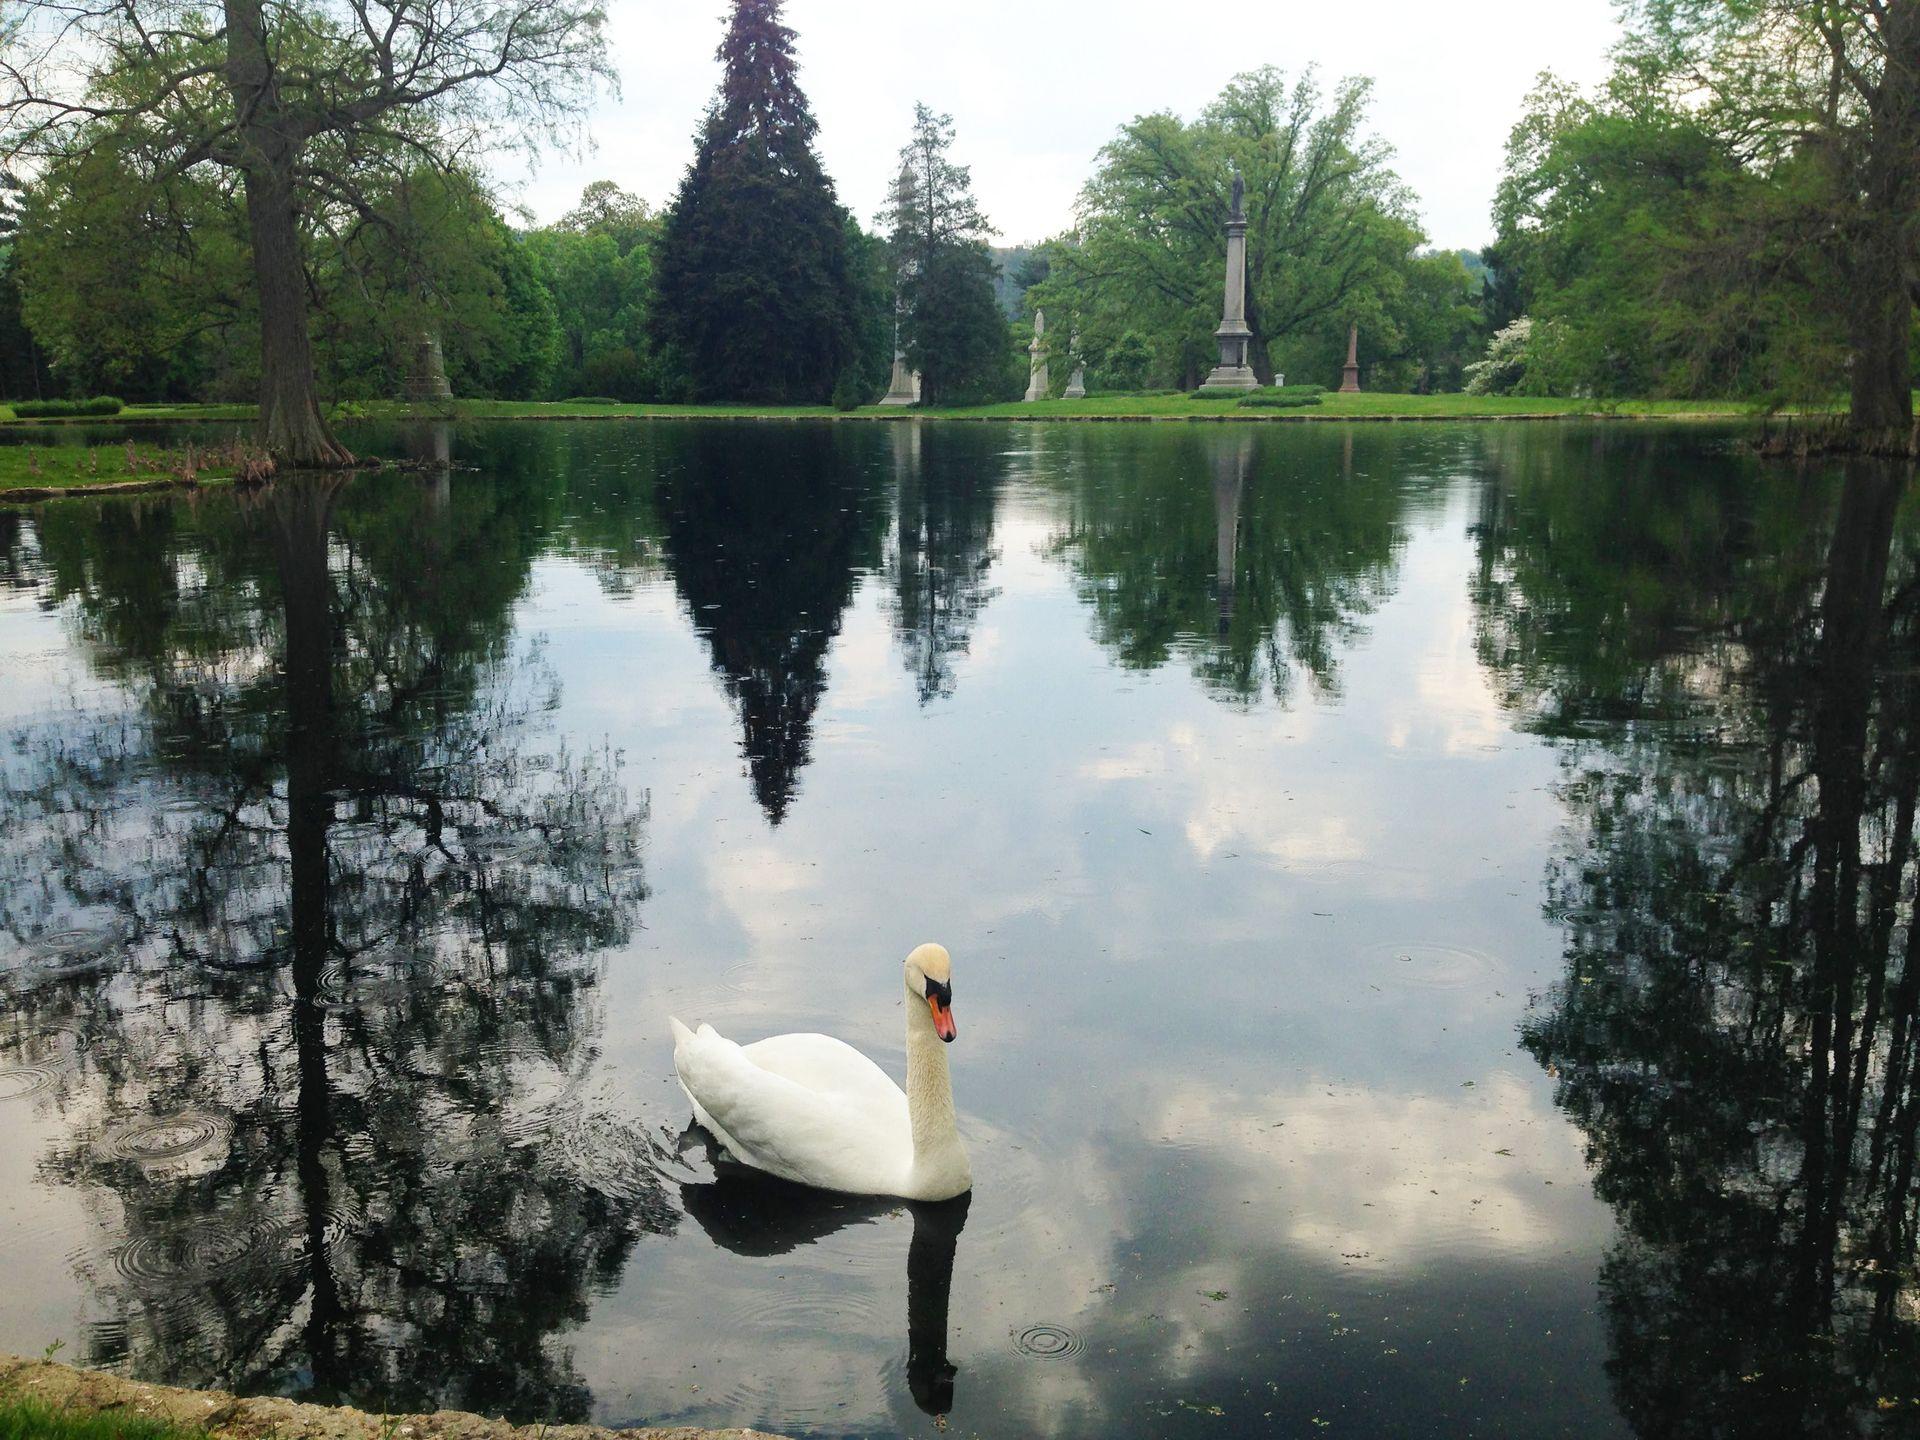 A swan in a lake at Spring Grove Cemetery. There are some tombstones across the pond in the background.